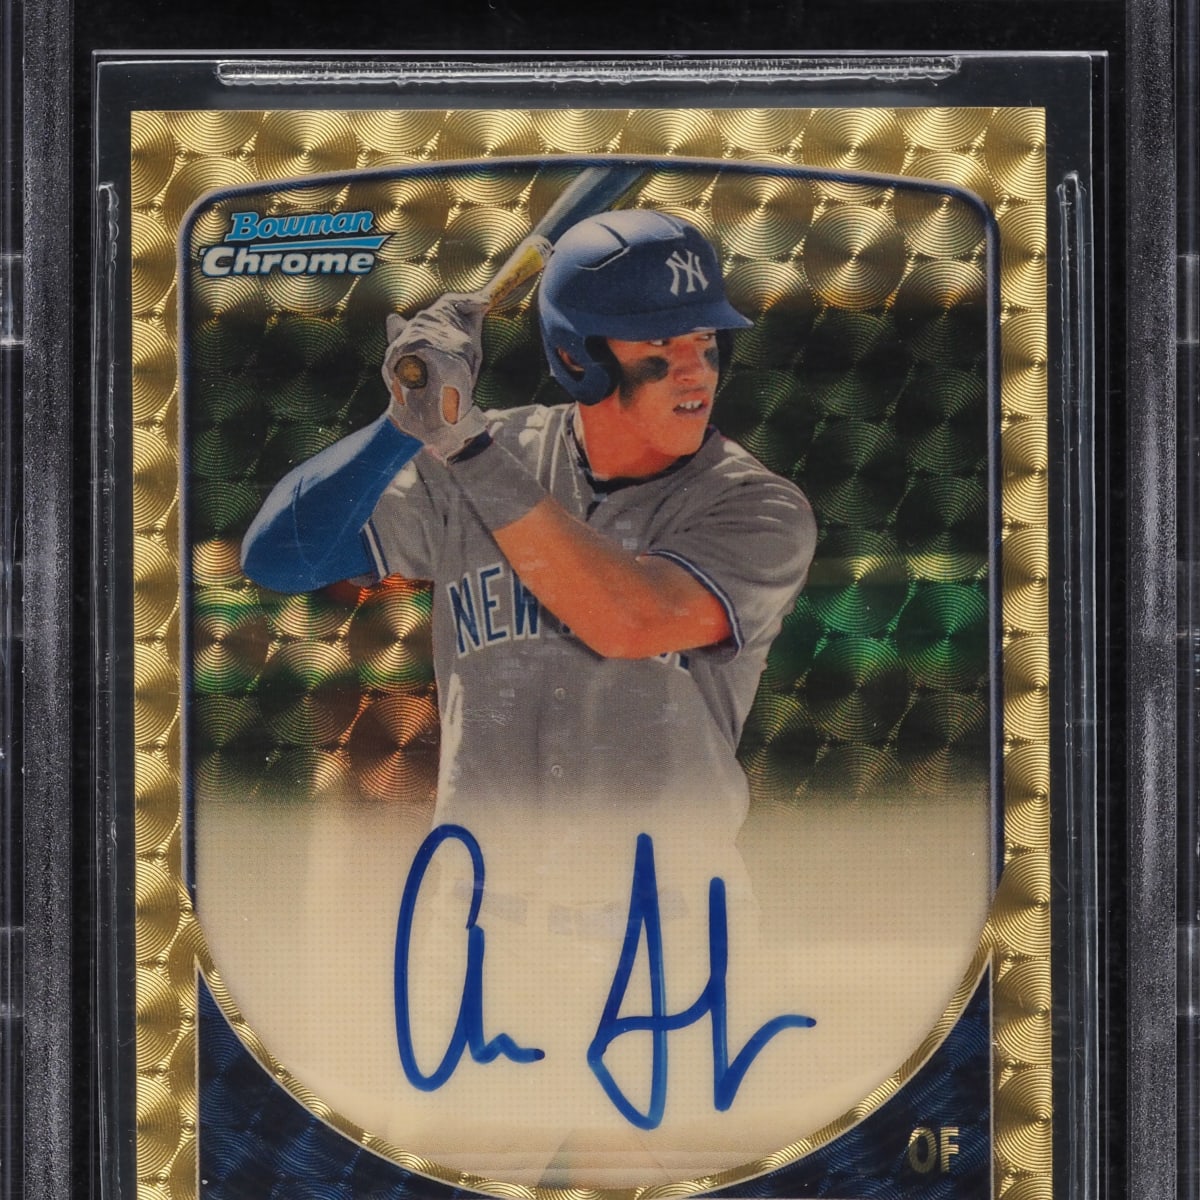 Aaron Judge Rookie Cards and Prospect Cards